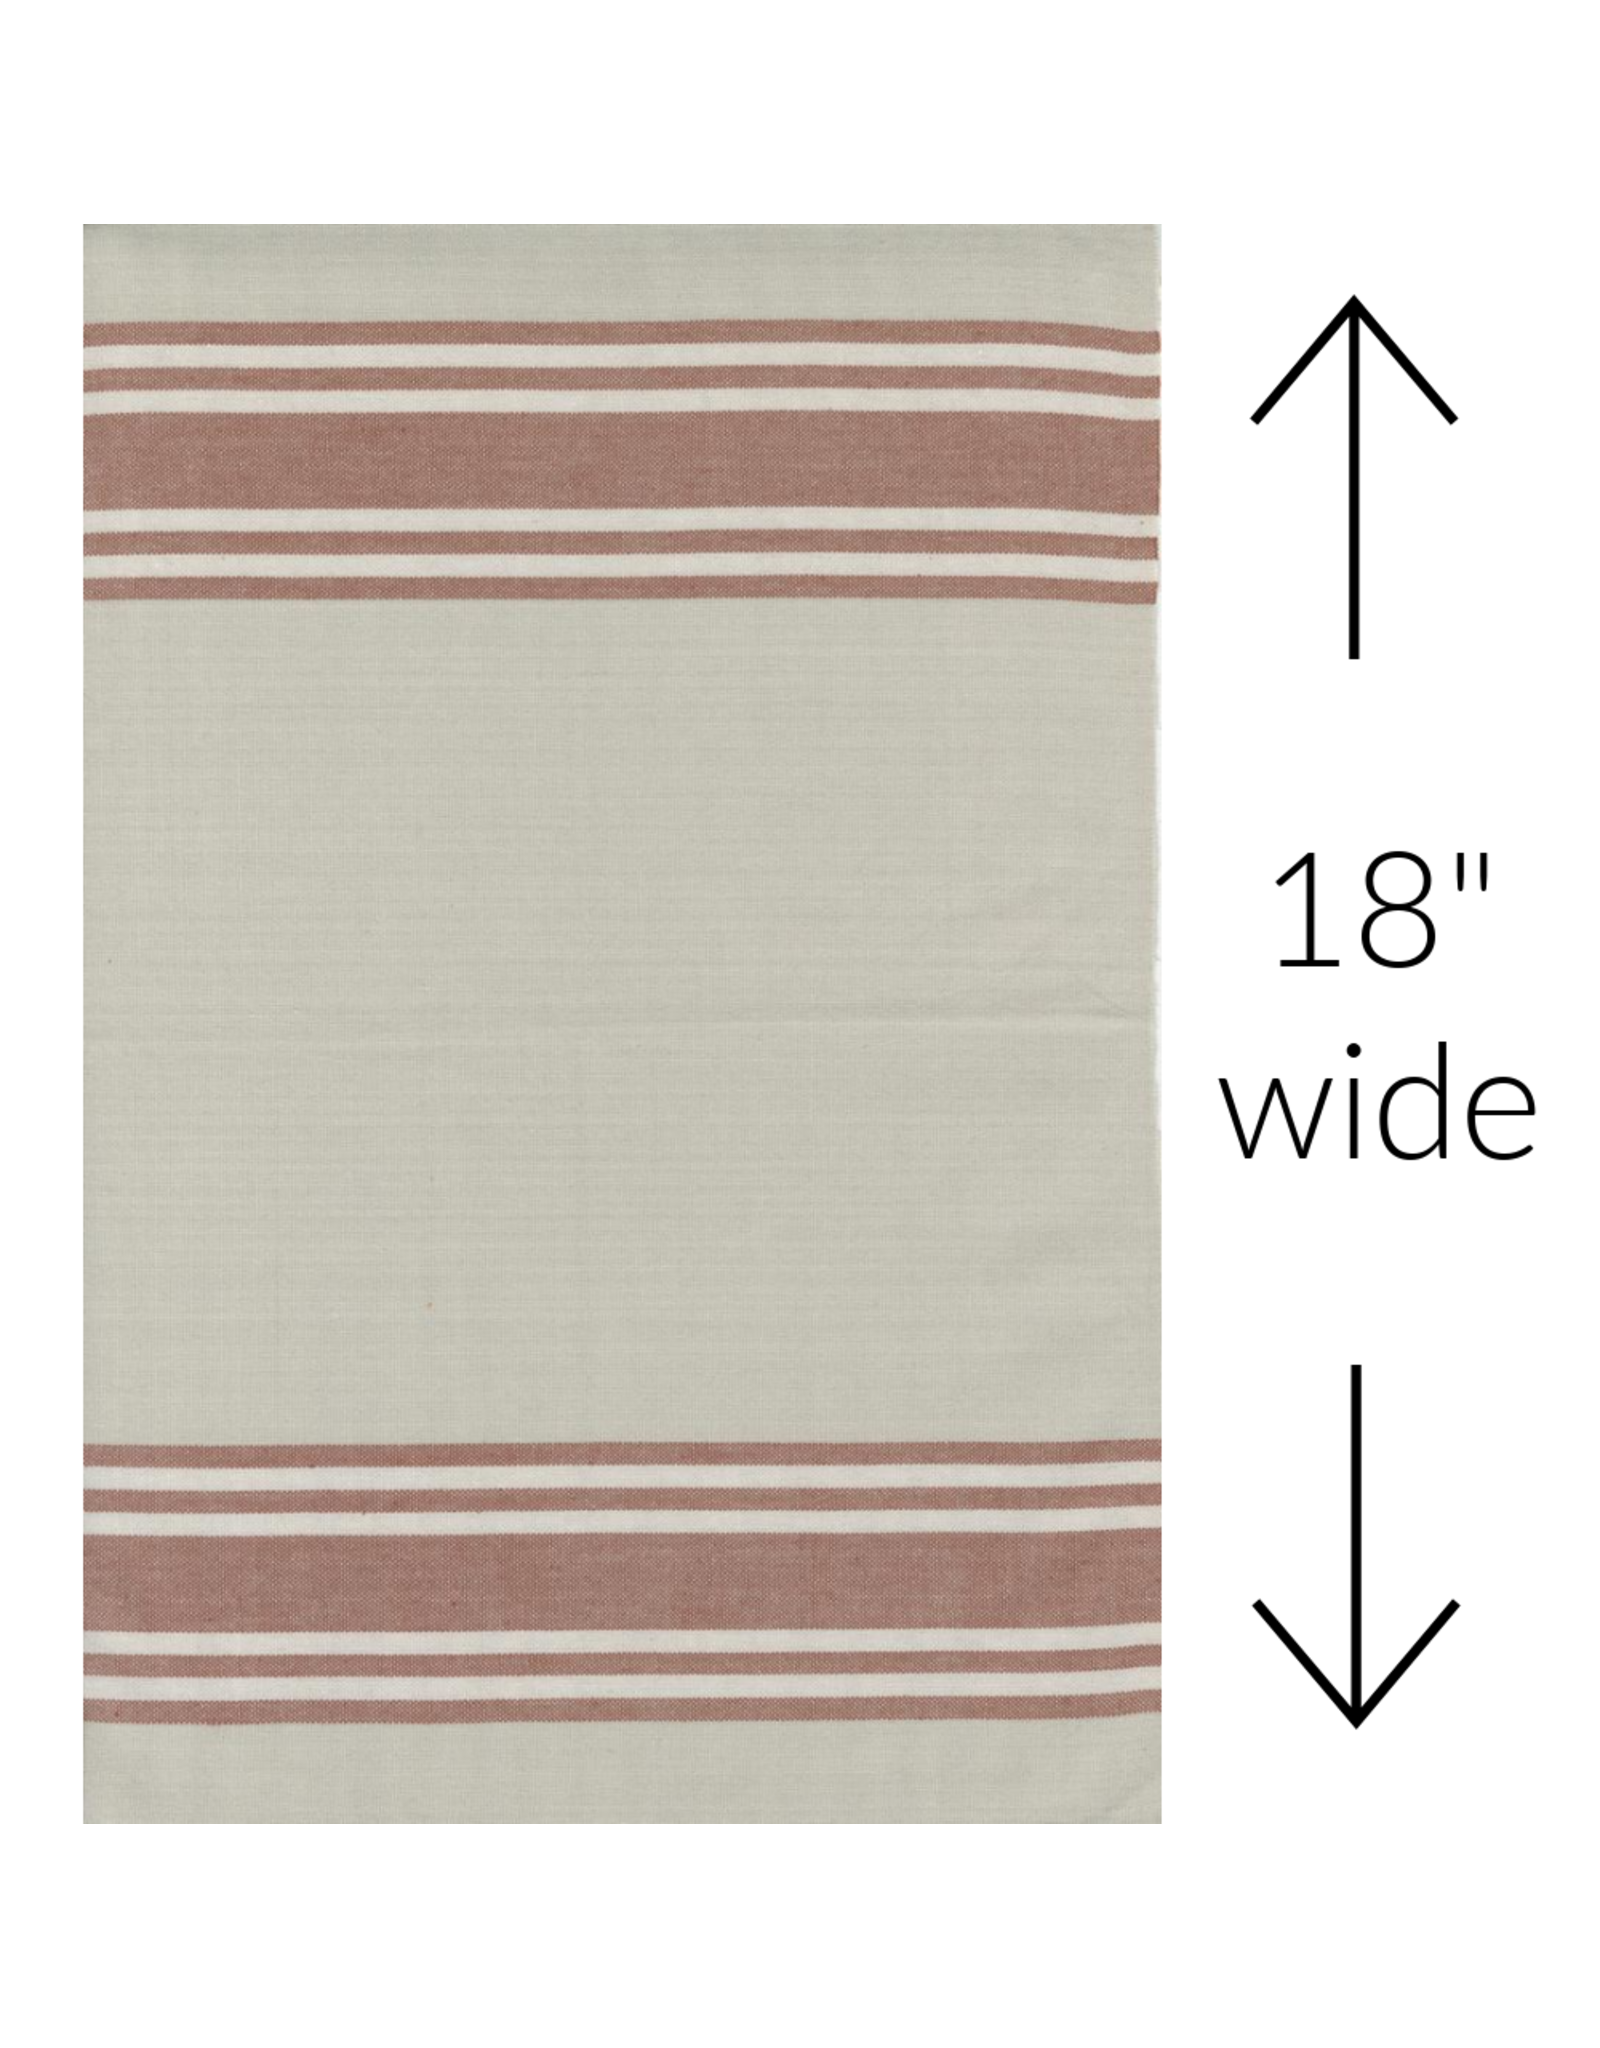 Moda Vista Toweling 18" wide, Rust, Sold by the Yard